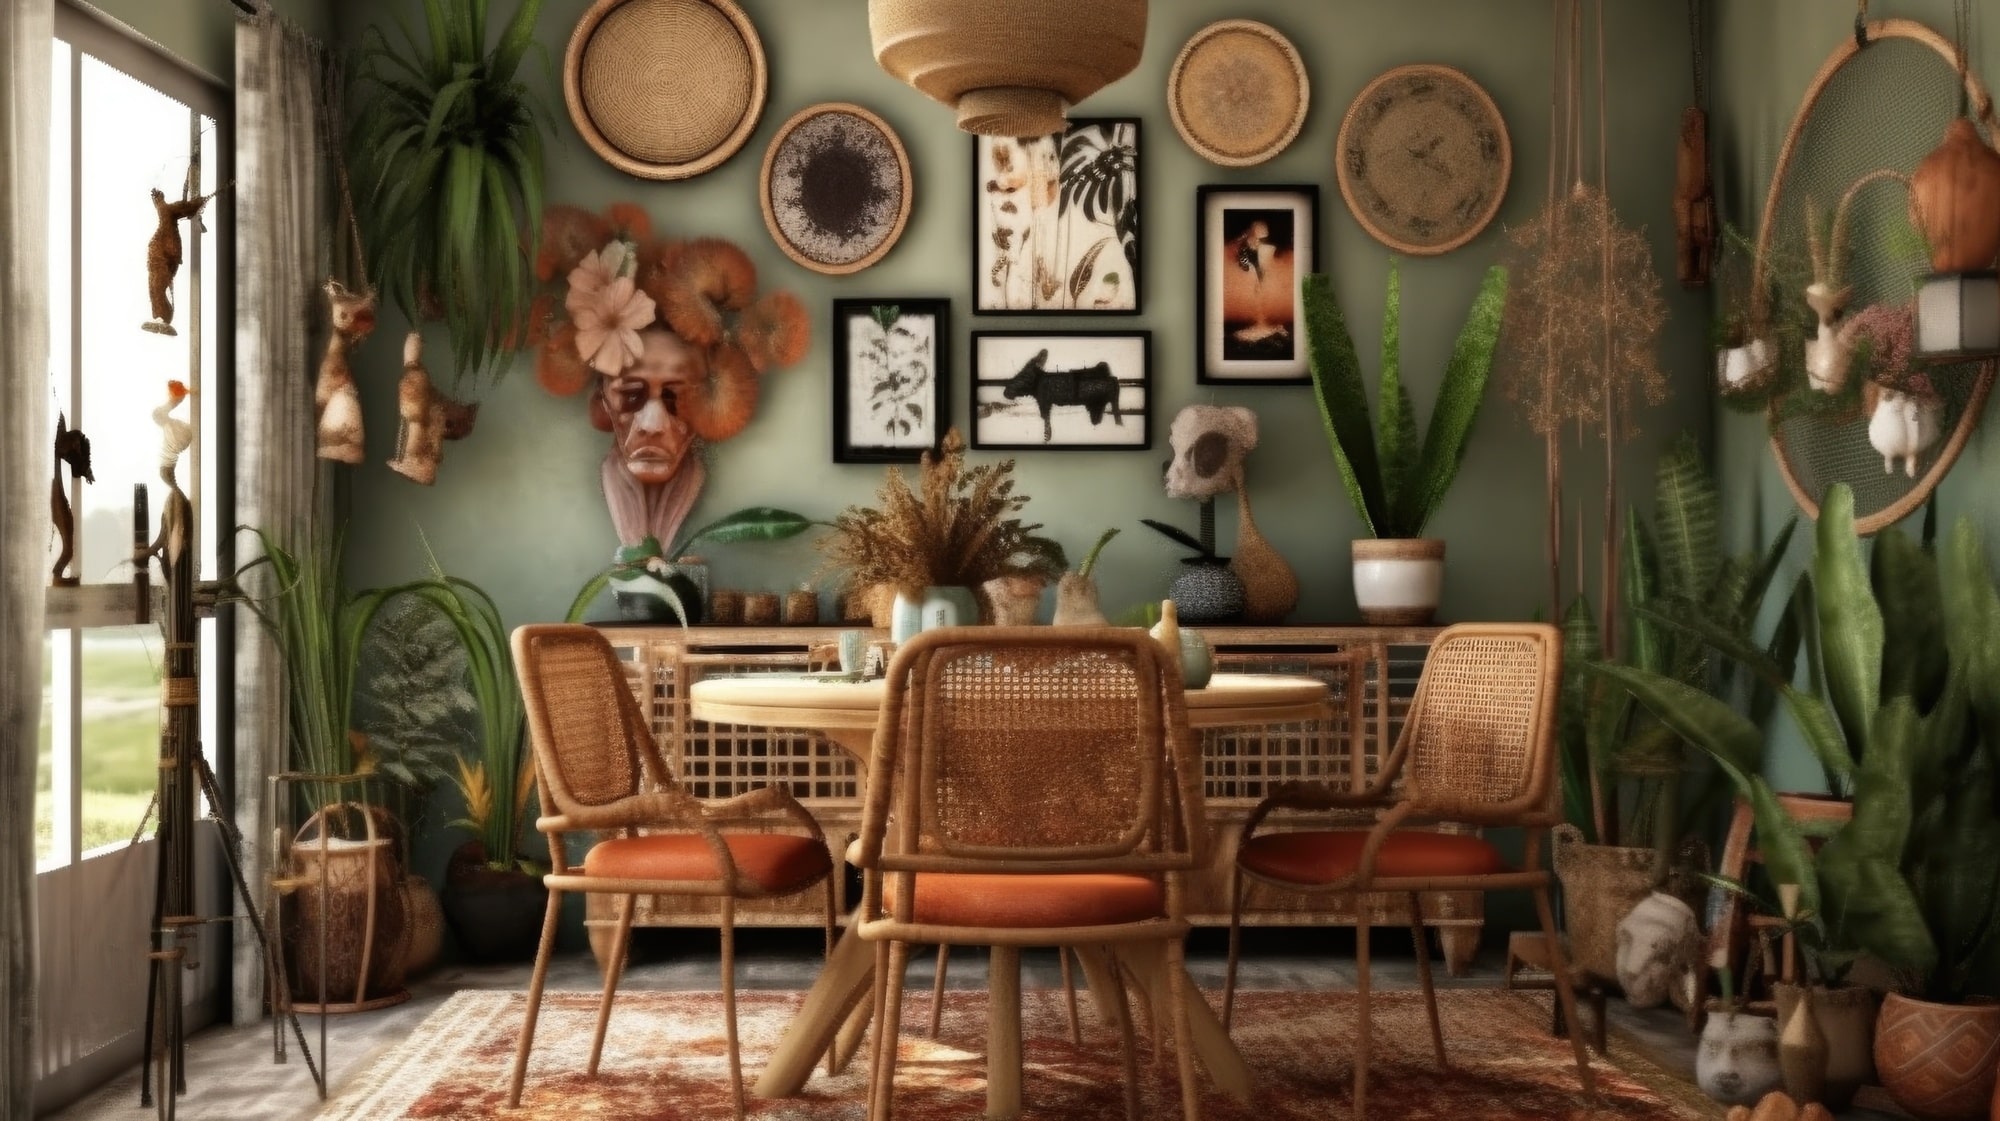 The Art Of Mixing And Matching Wall Decor Elements